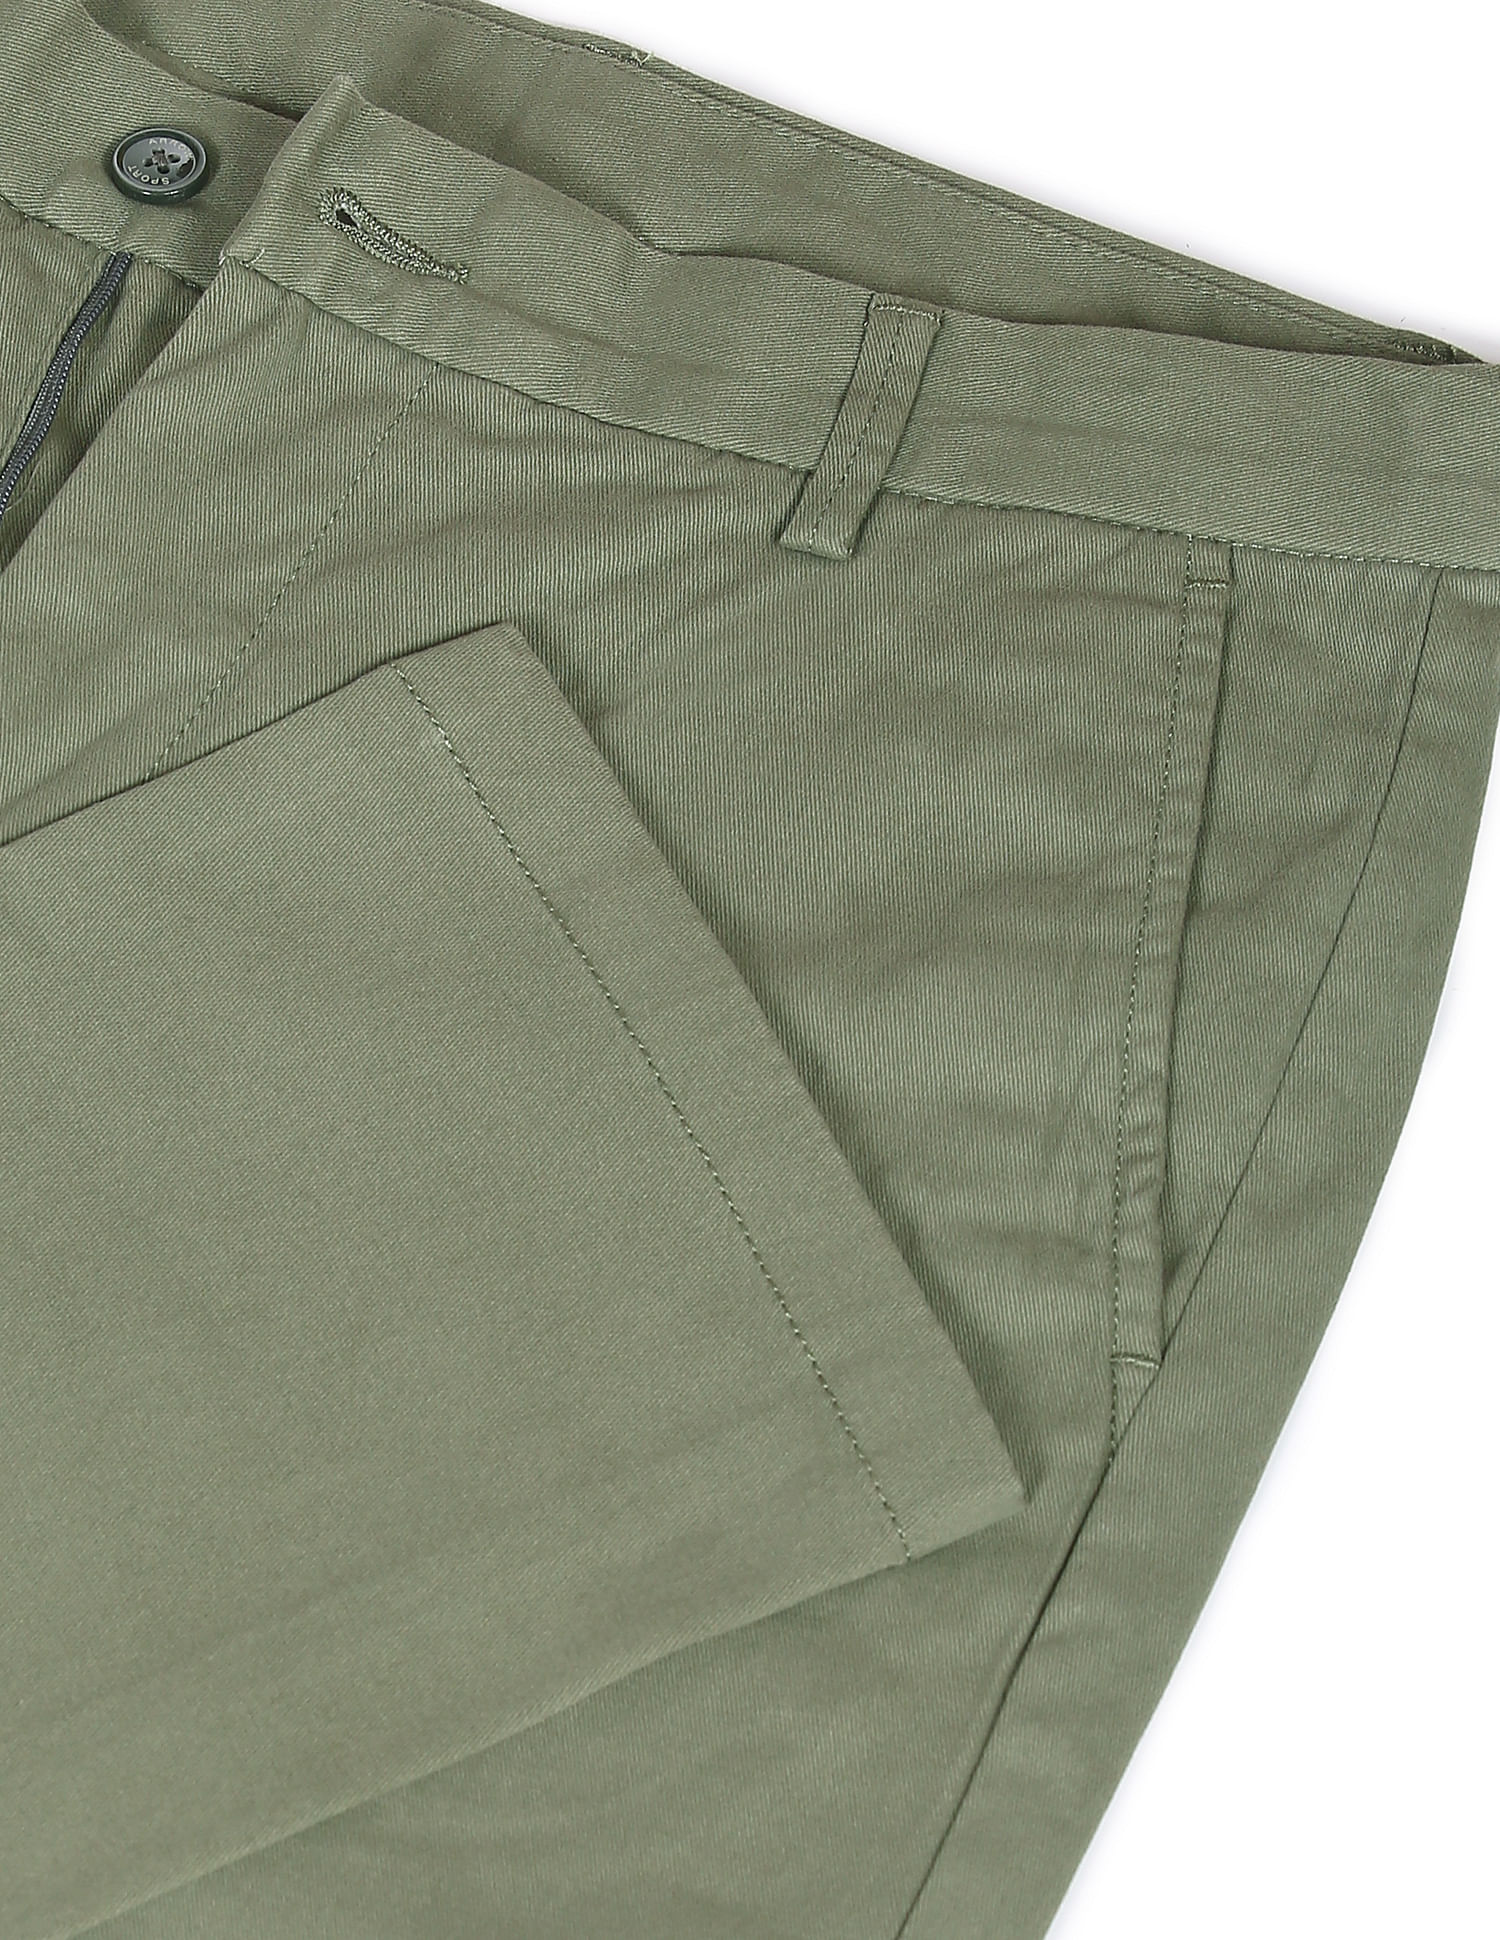 Brandit Pure Vintage Trousers Olive Green Mens Combat Cargo Military Army  Hiking  eBay